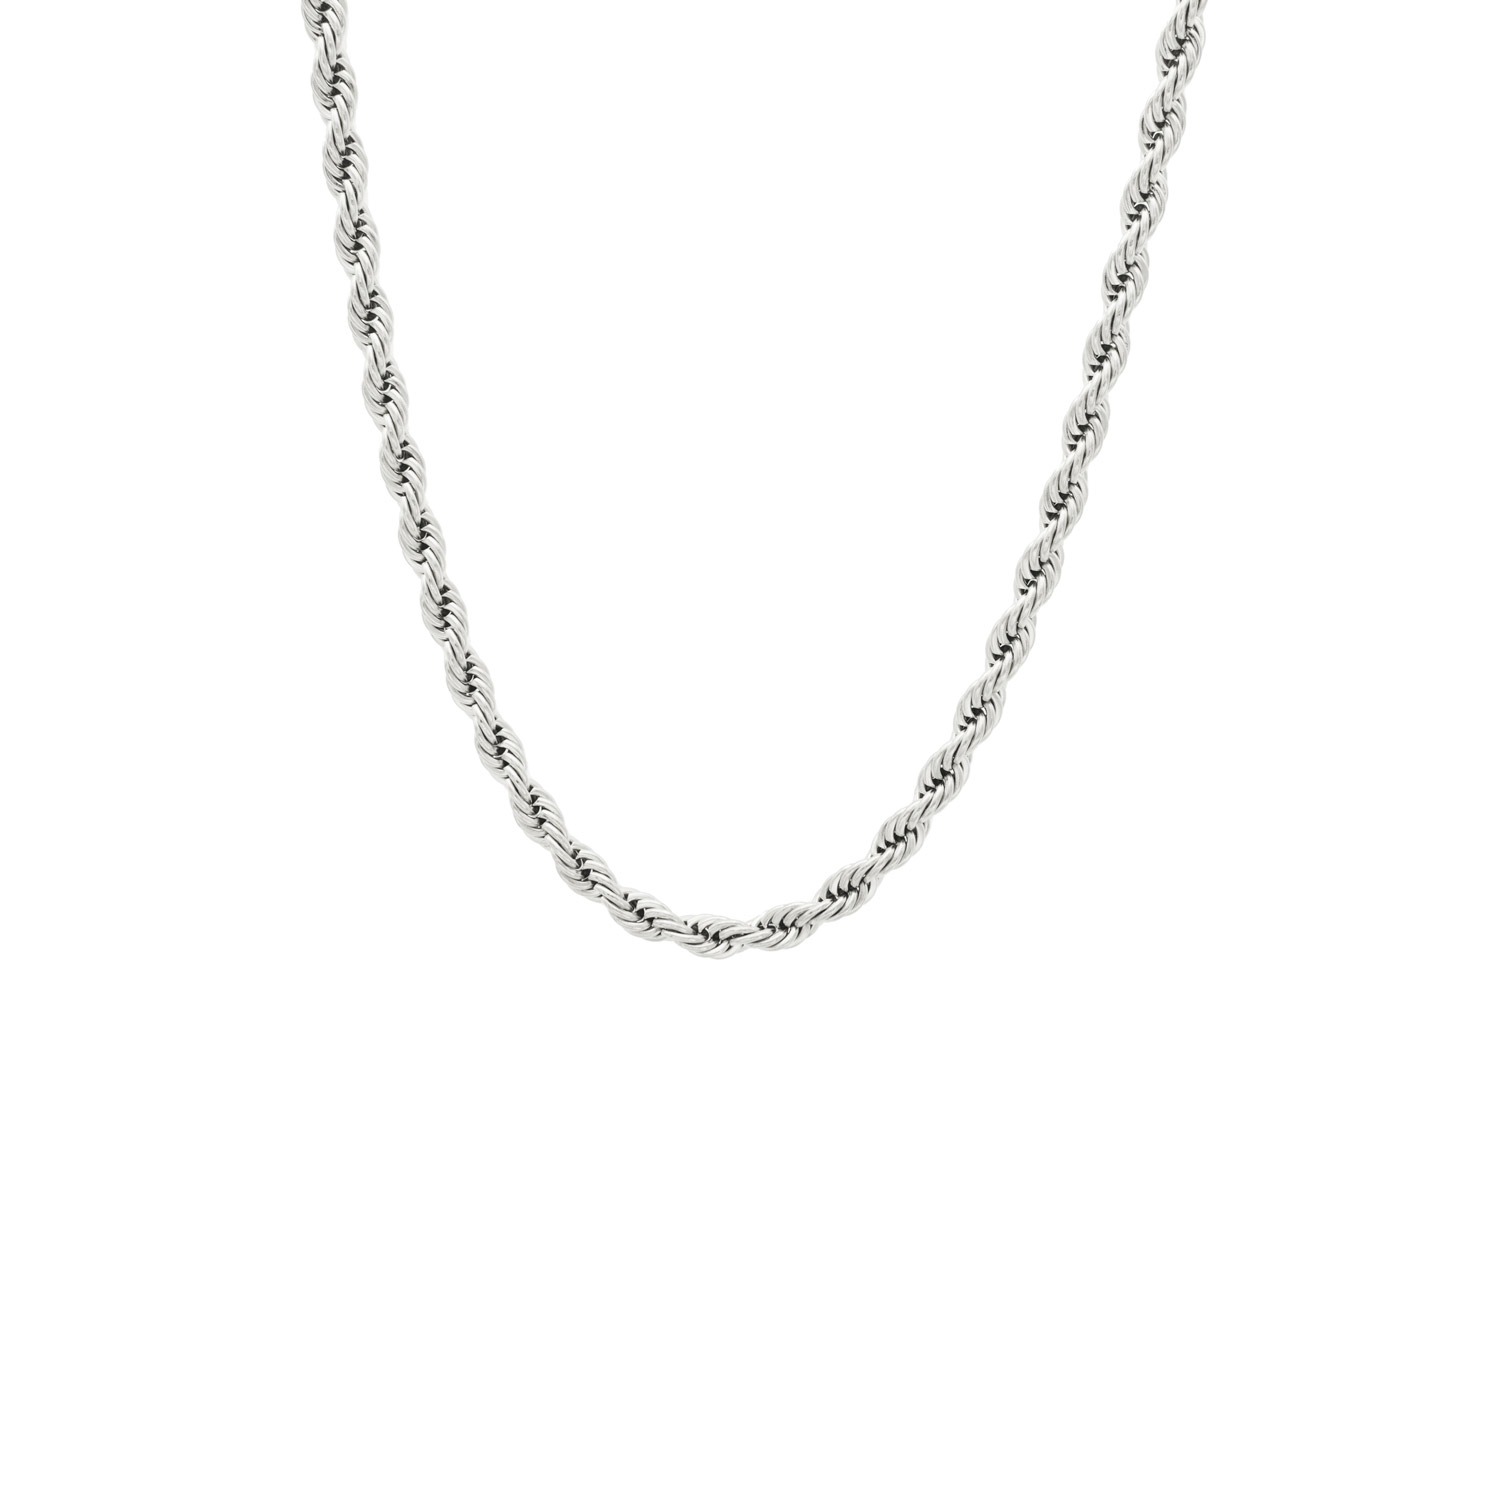 Rope necklace in silver – velvet accessoriess